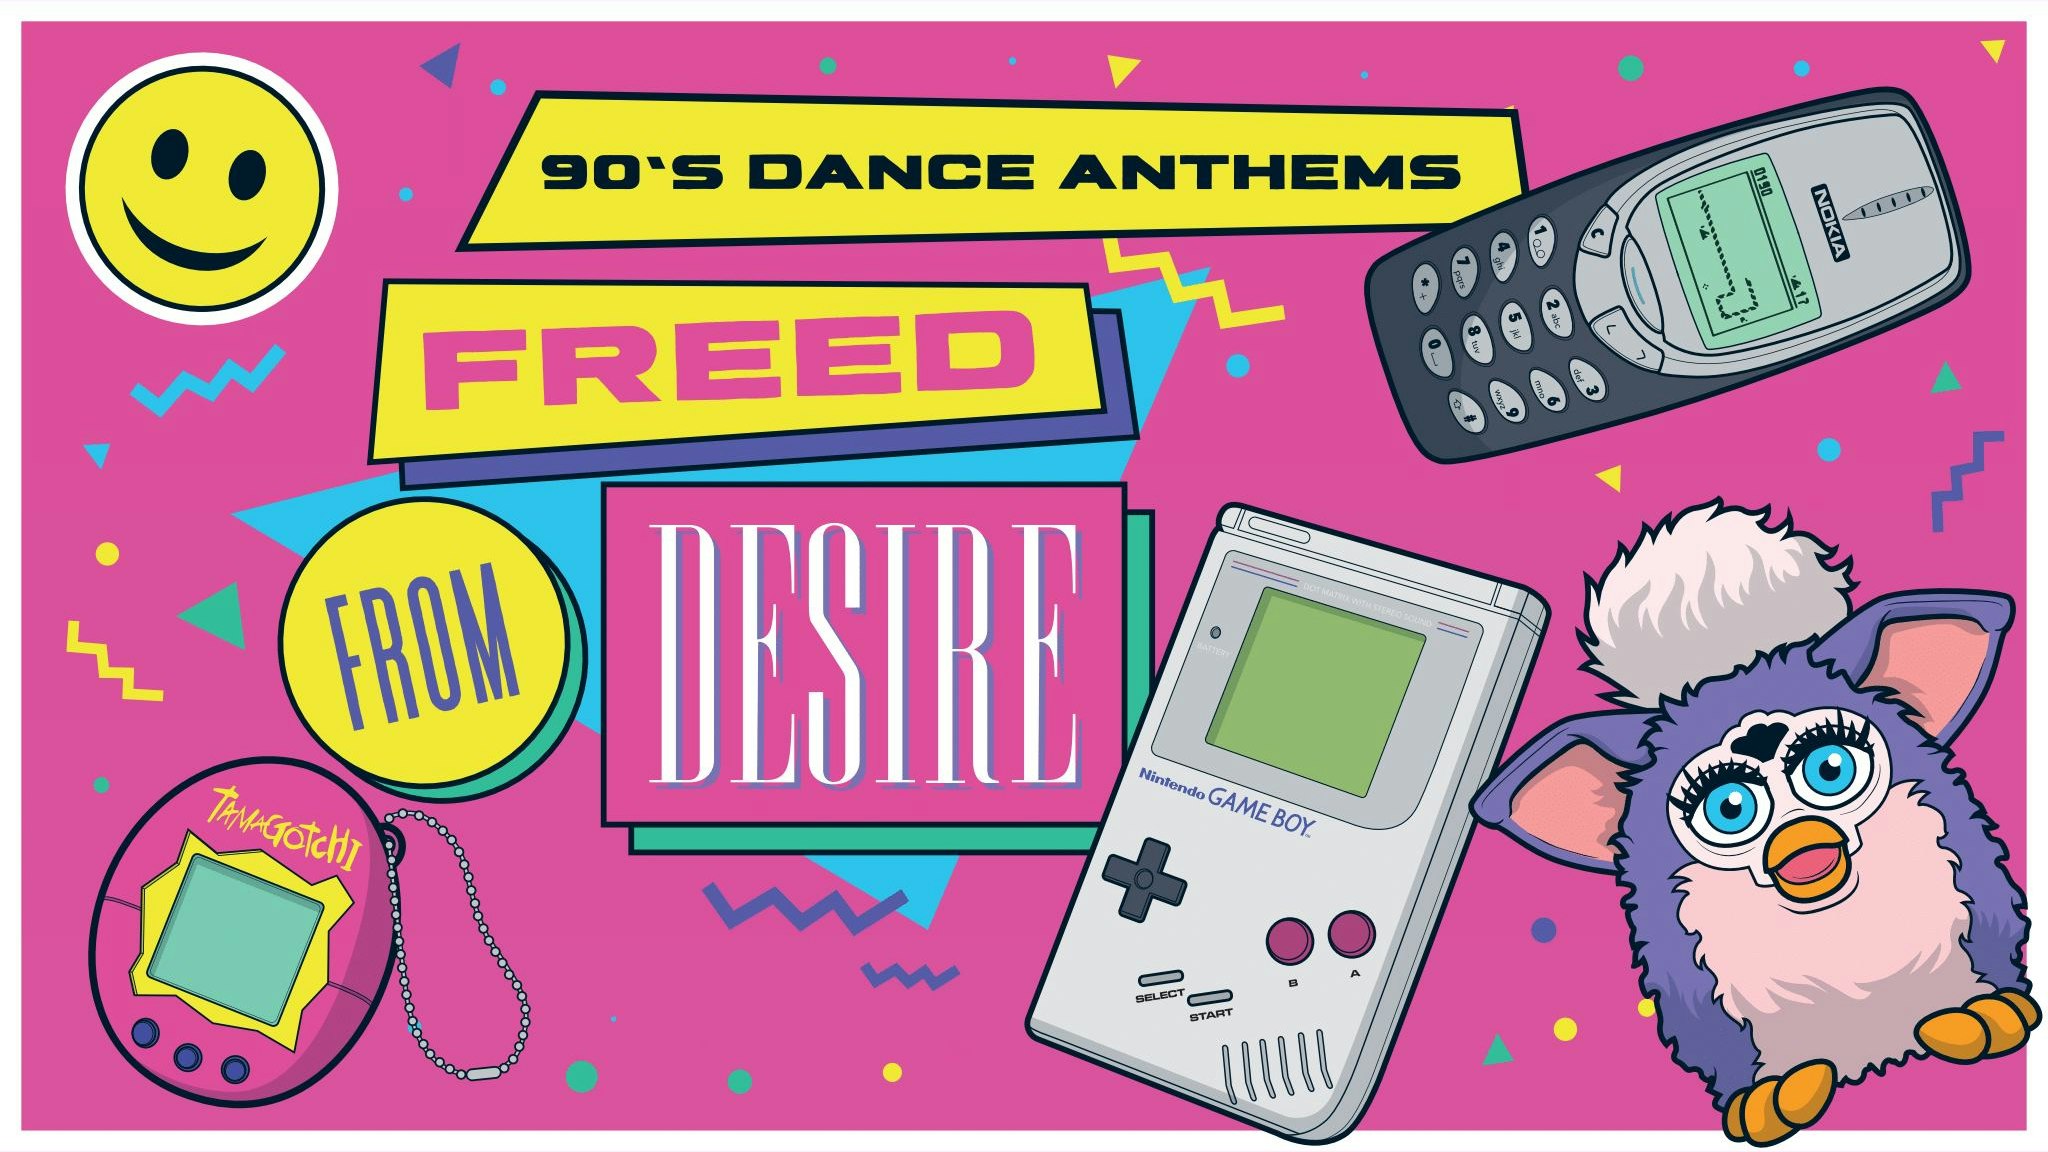 Freed From Desire – 90s Club Anthems Party